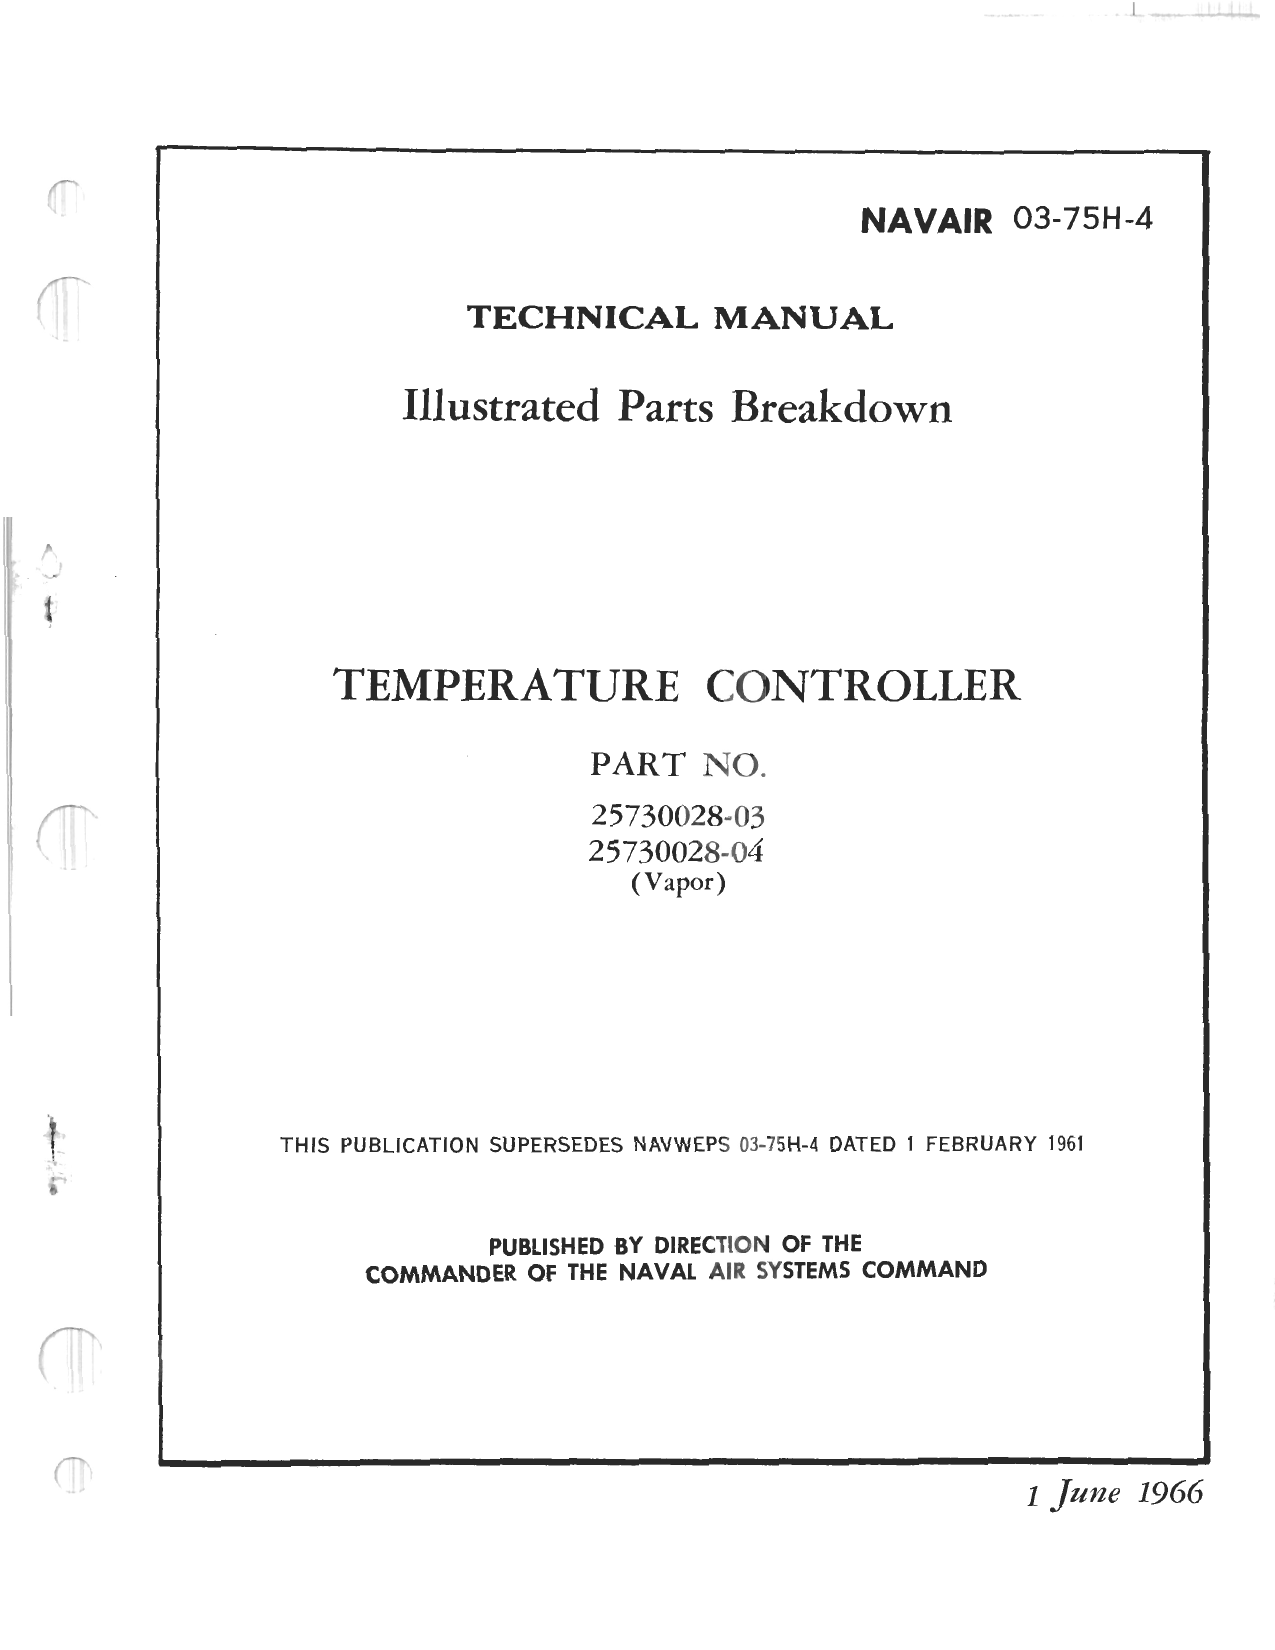 Sample page 1 from AirCorps Library document: Illustrated Parts Breakdown for Temperature Controller - Part 25730028-03 and 25730028-04